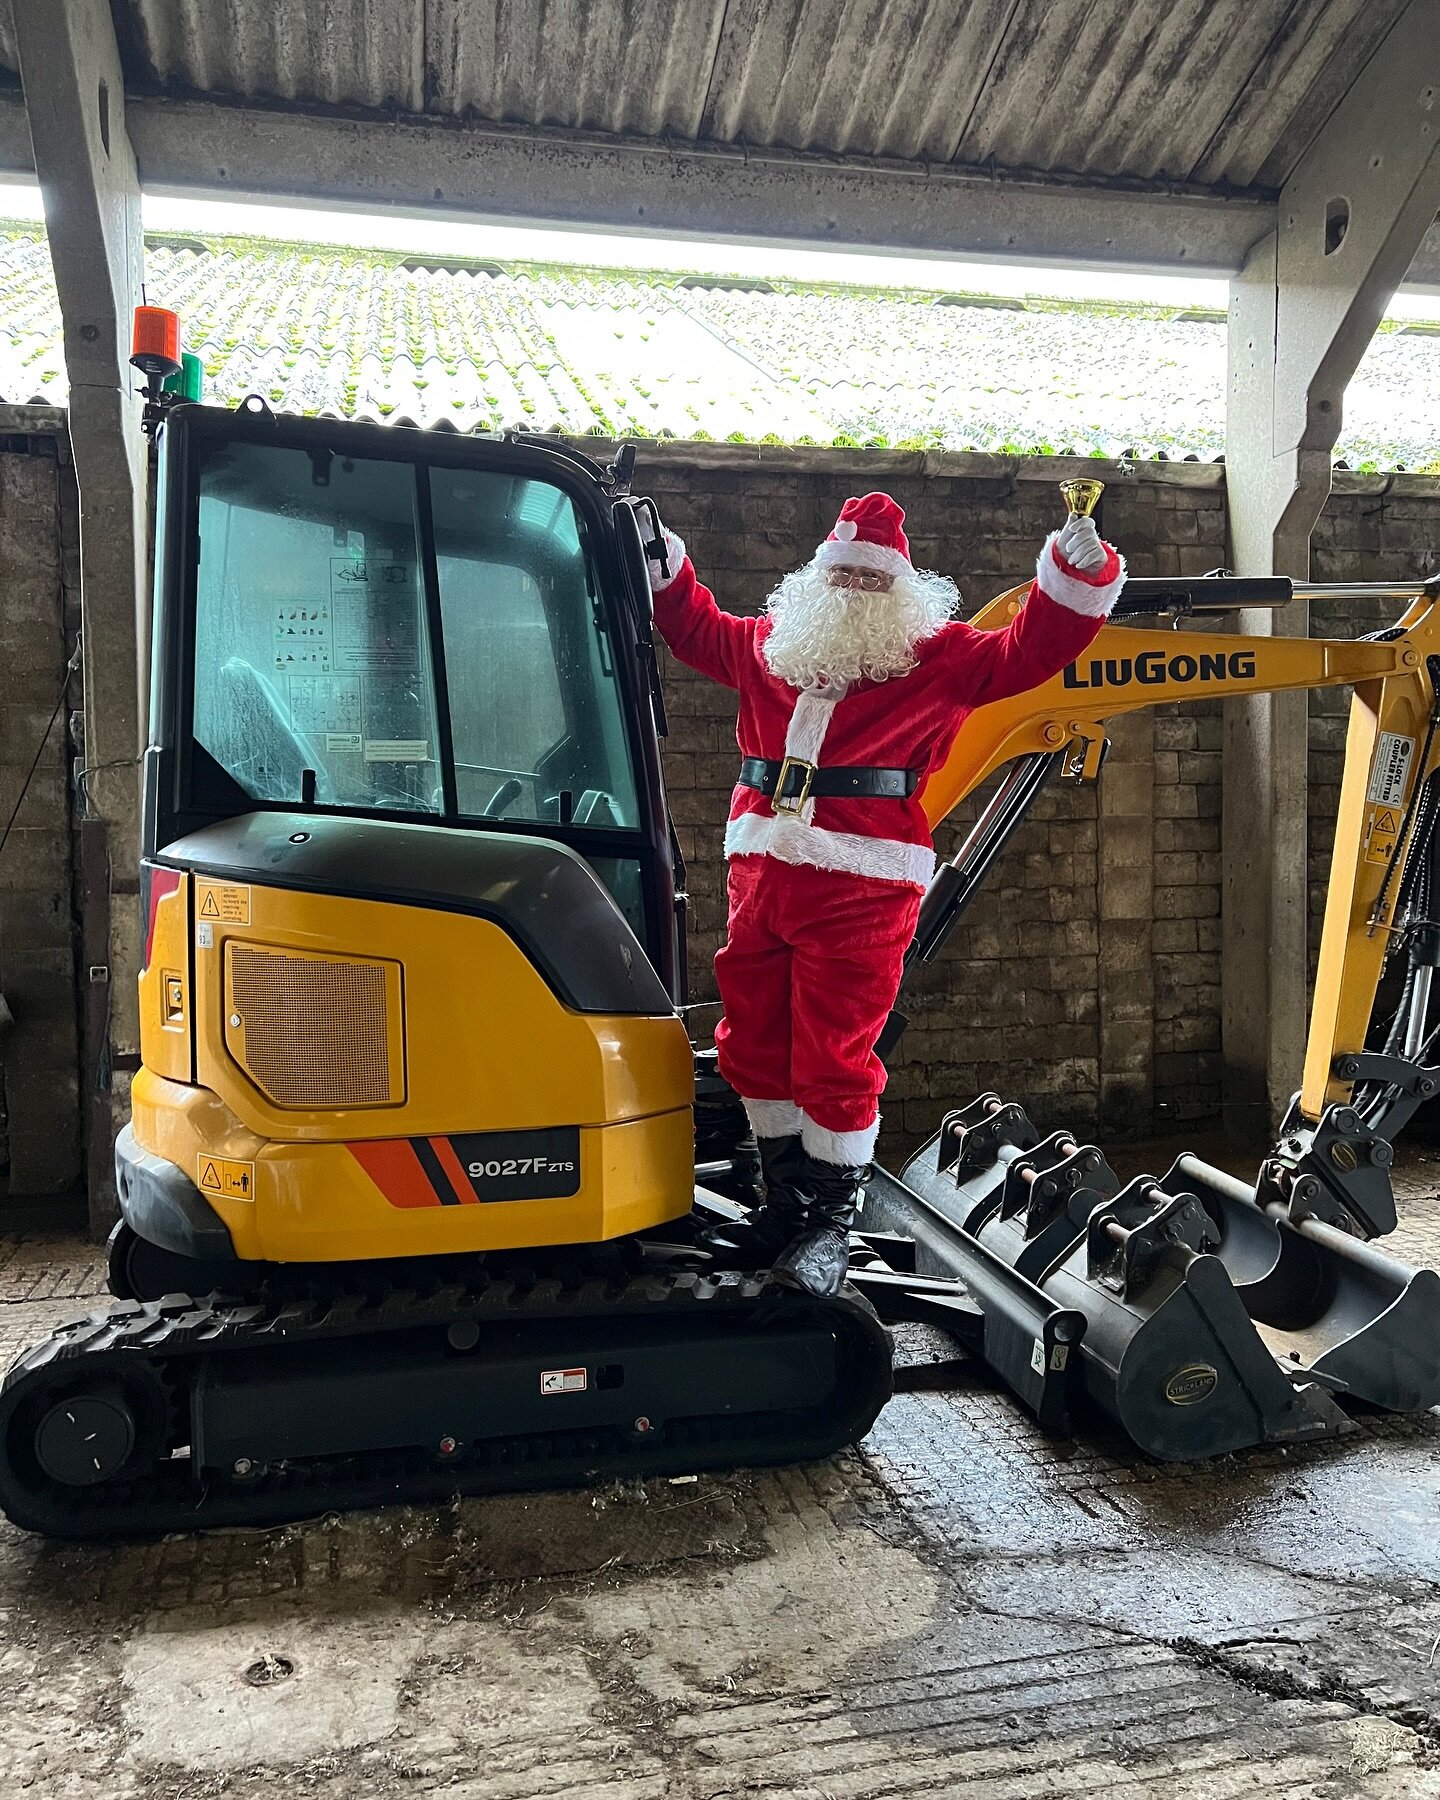 Sim&hellip;*ahem* Santa took a break from his busy schedule to pay us a visit, aren&rsquo;t we lucky?! Wishing all our friends, colleagues and customers a very Merry Christmas and a happy success 2024 🎄🎅🏽 

Keep an eye out on our instagram over th